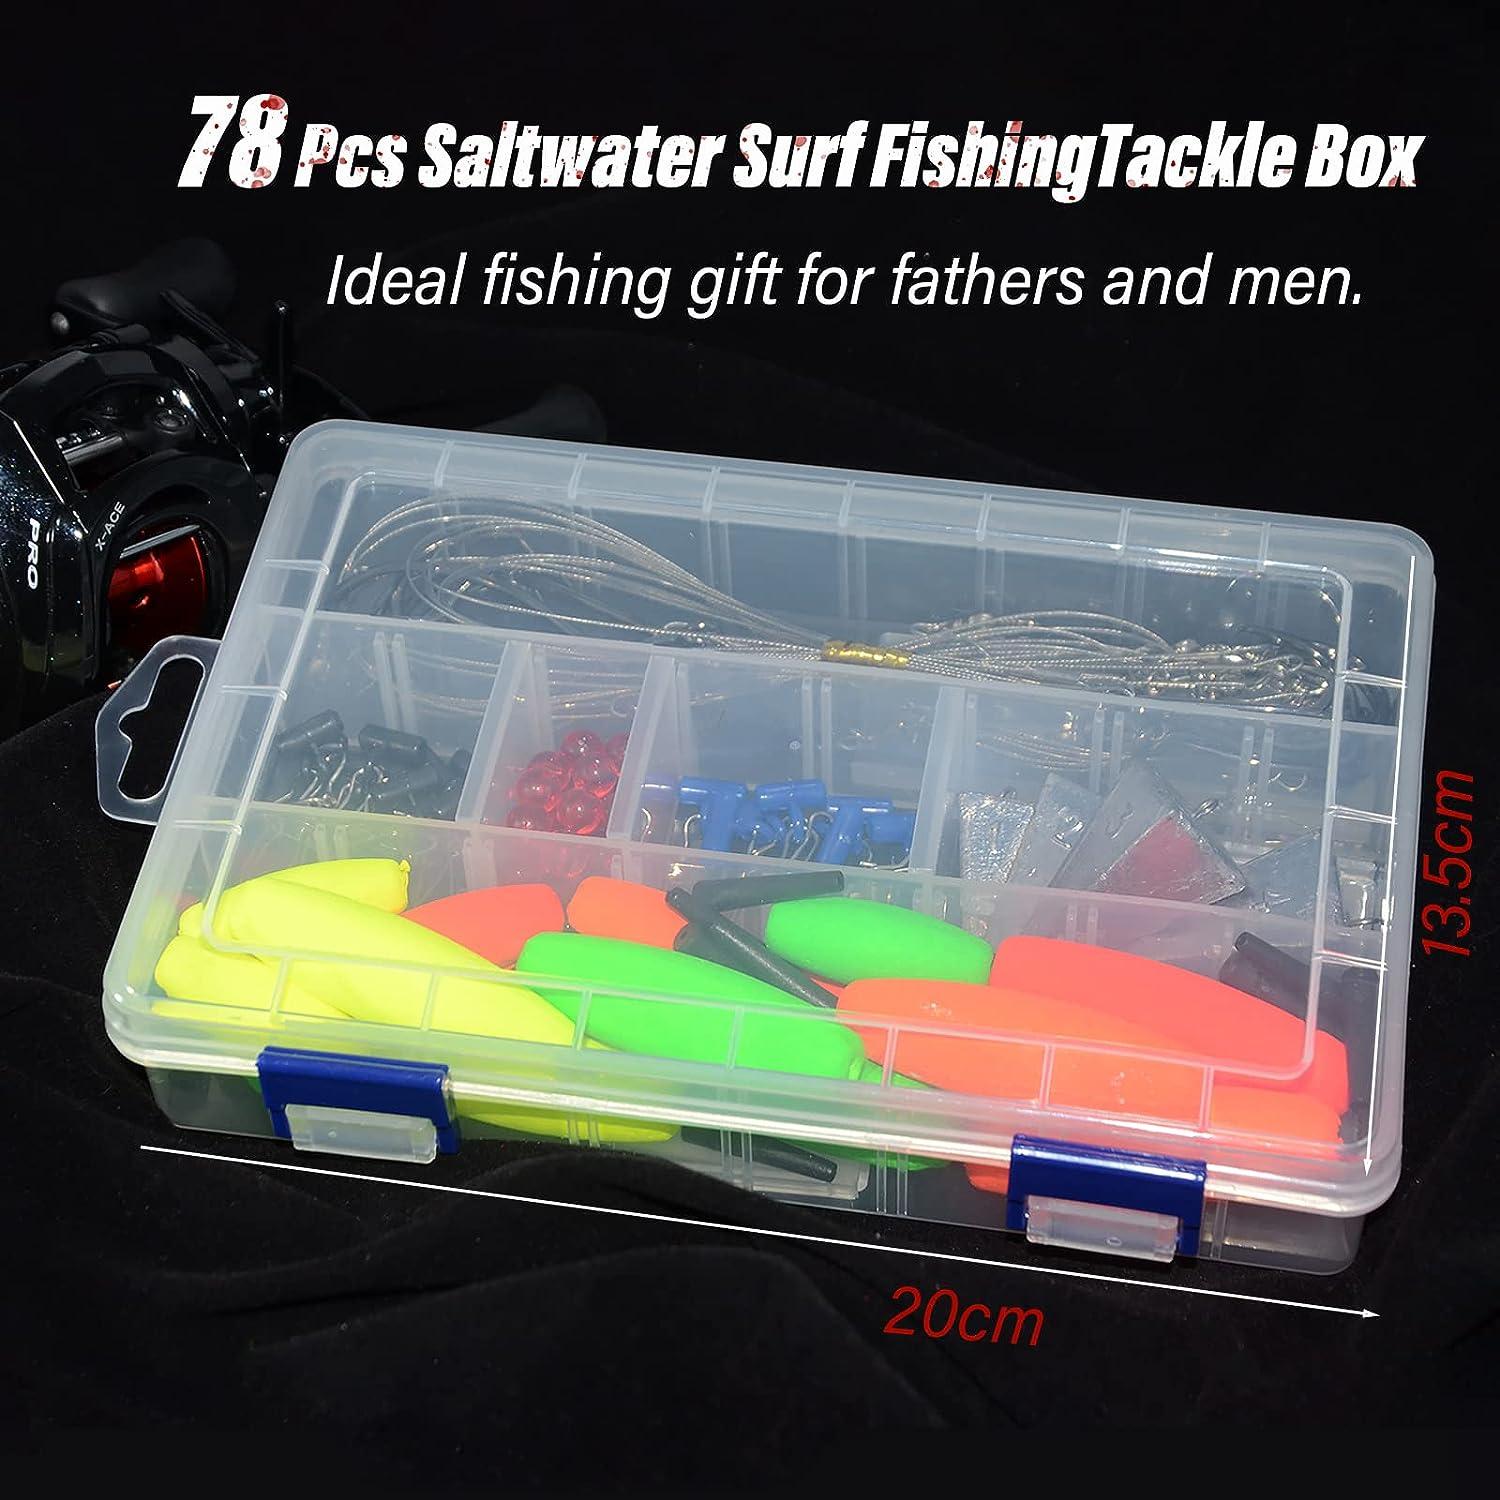 SEAOWL 78Pcs Saltwater Surf Fishing Kit Fish Pompano rig,Tackle Box  Included Fishing Hooks Rig Floats Pyramid Sinker Weights Sinker Slider  Beads for Salt Beach Gear Equipment